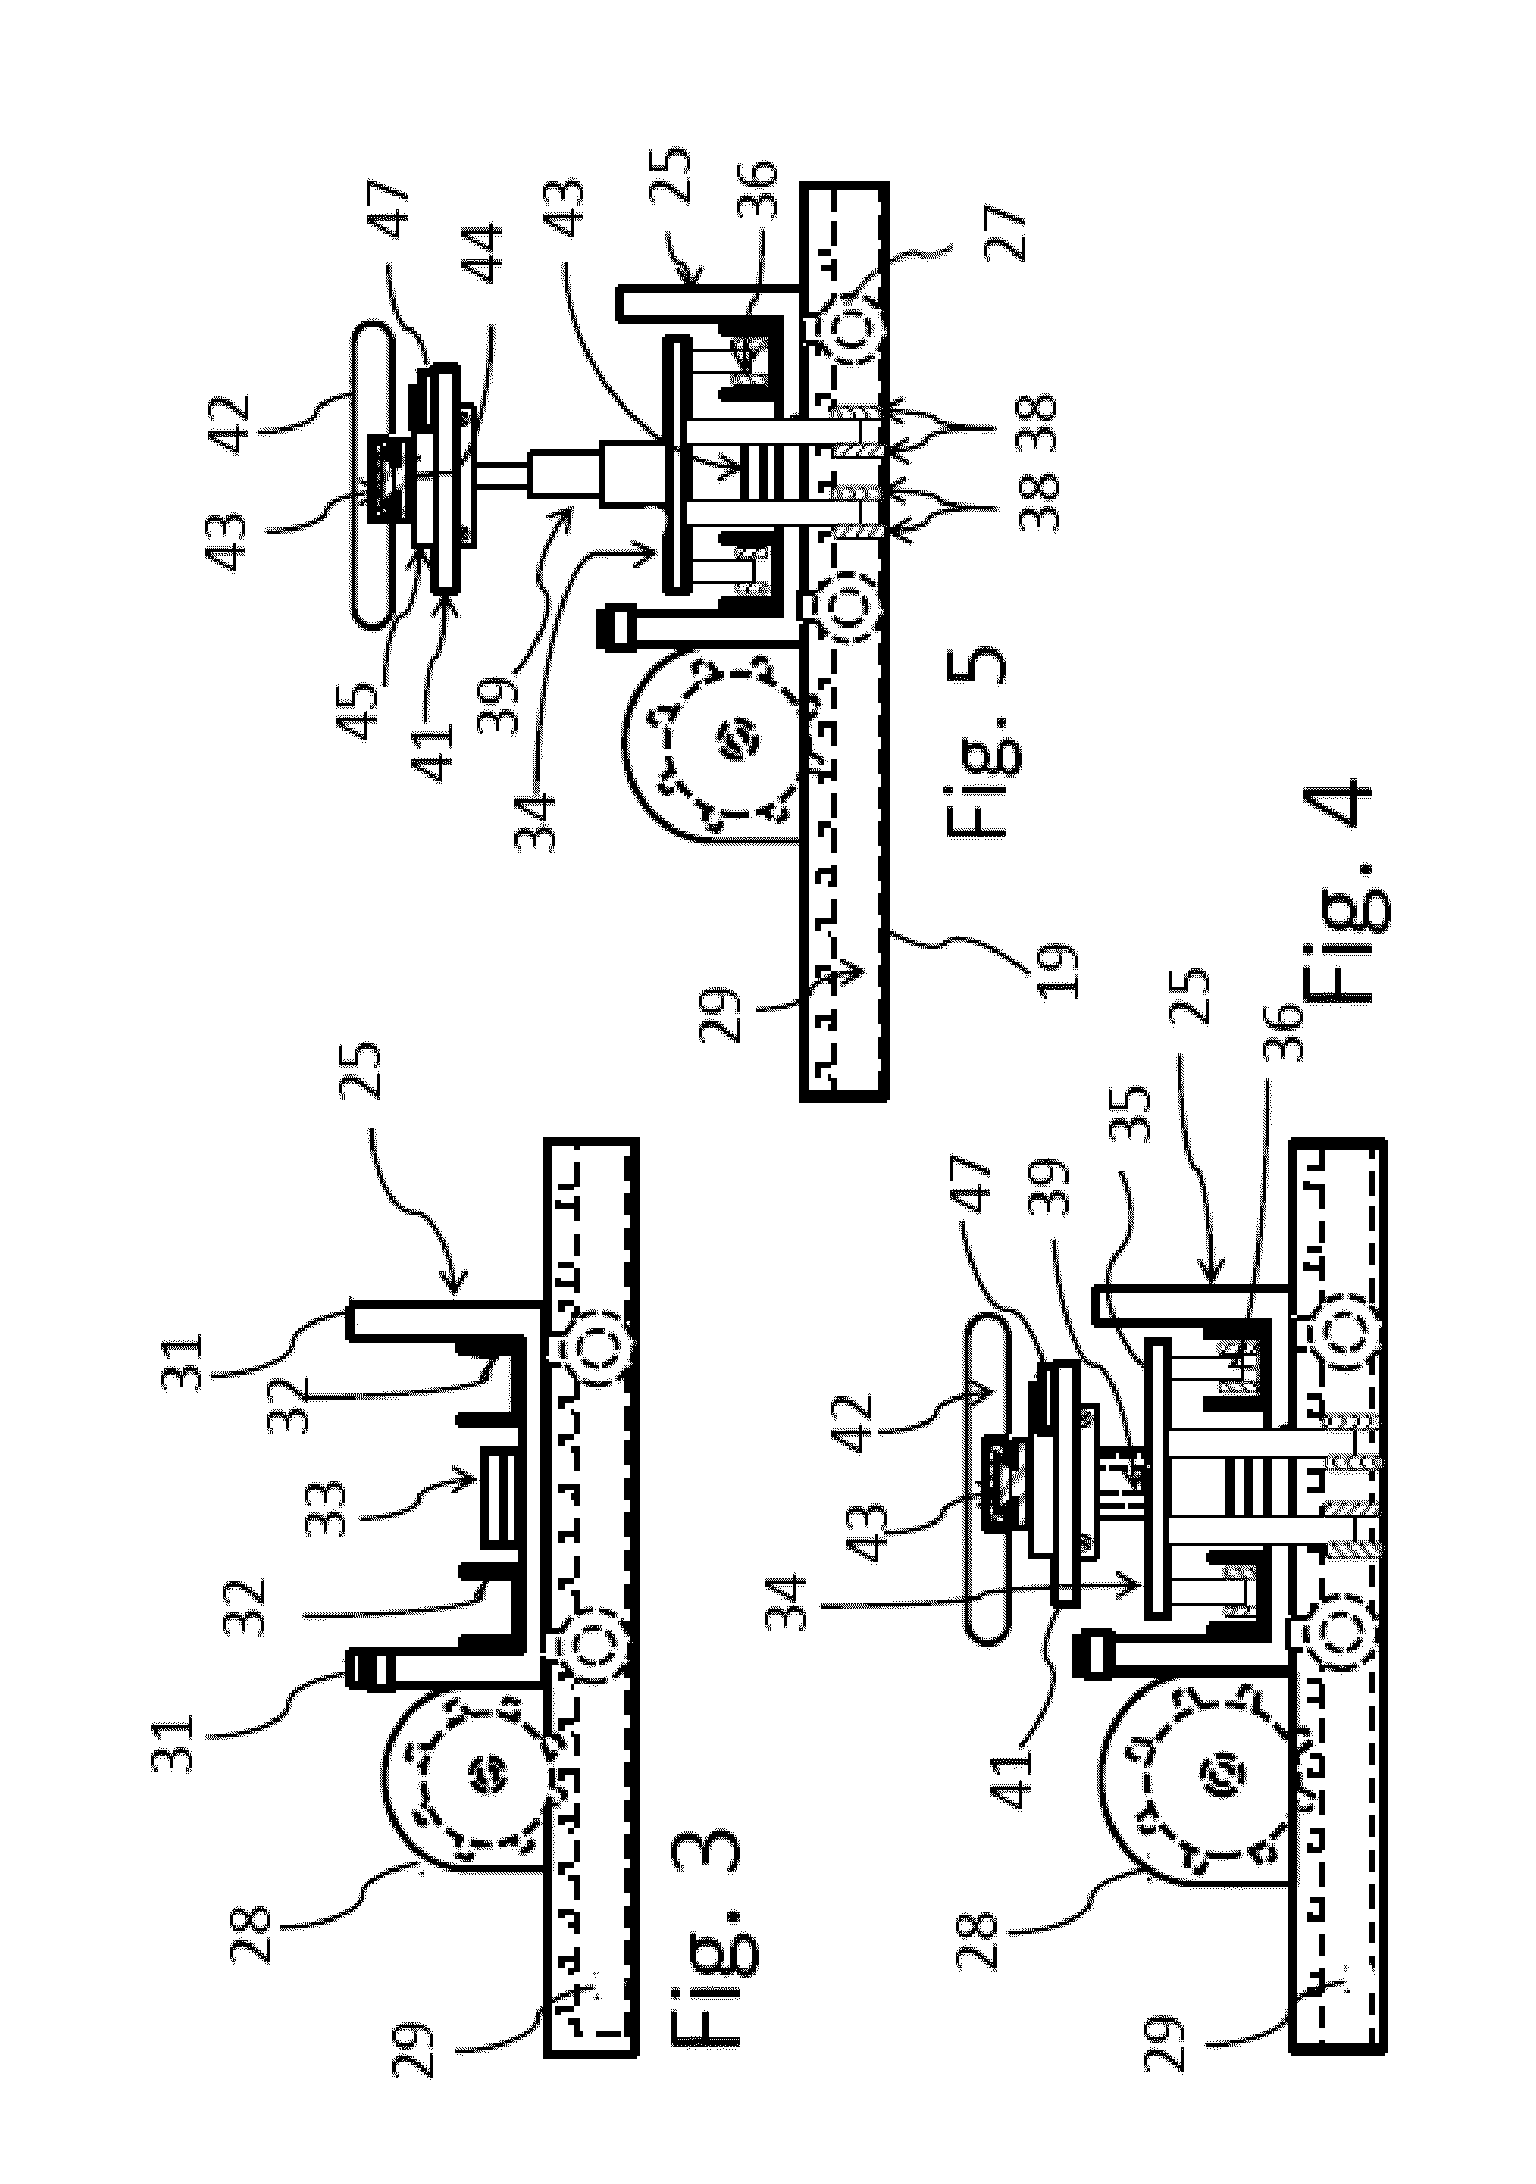 Device for delivering personal vehicles, such as wheelchairs or scooters, for drivers with disabilities, and method for implementing same